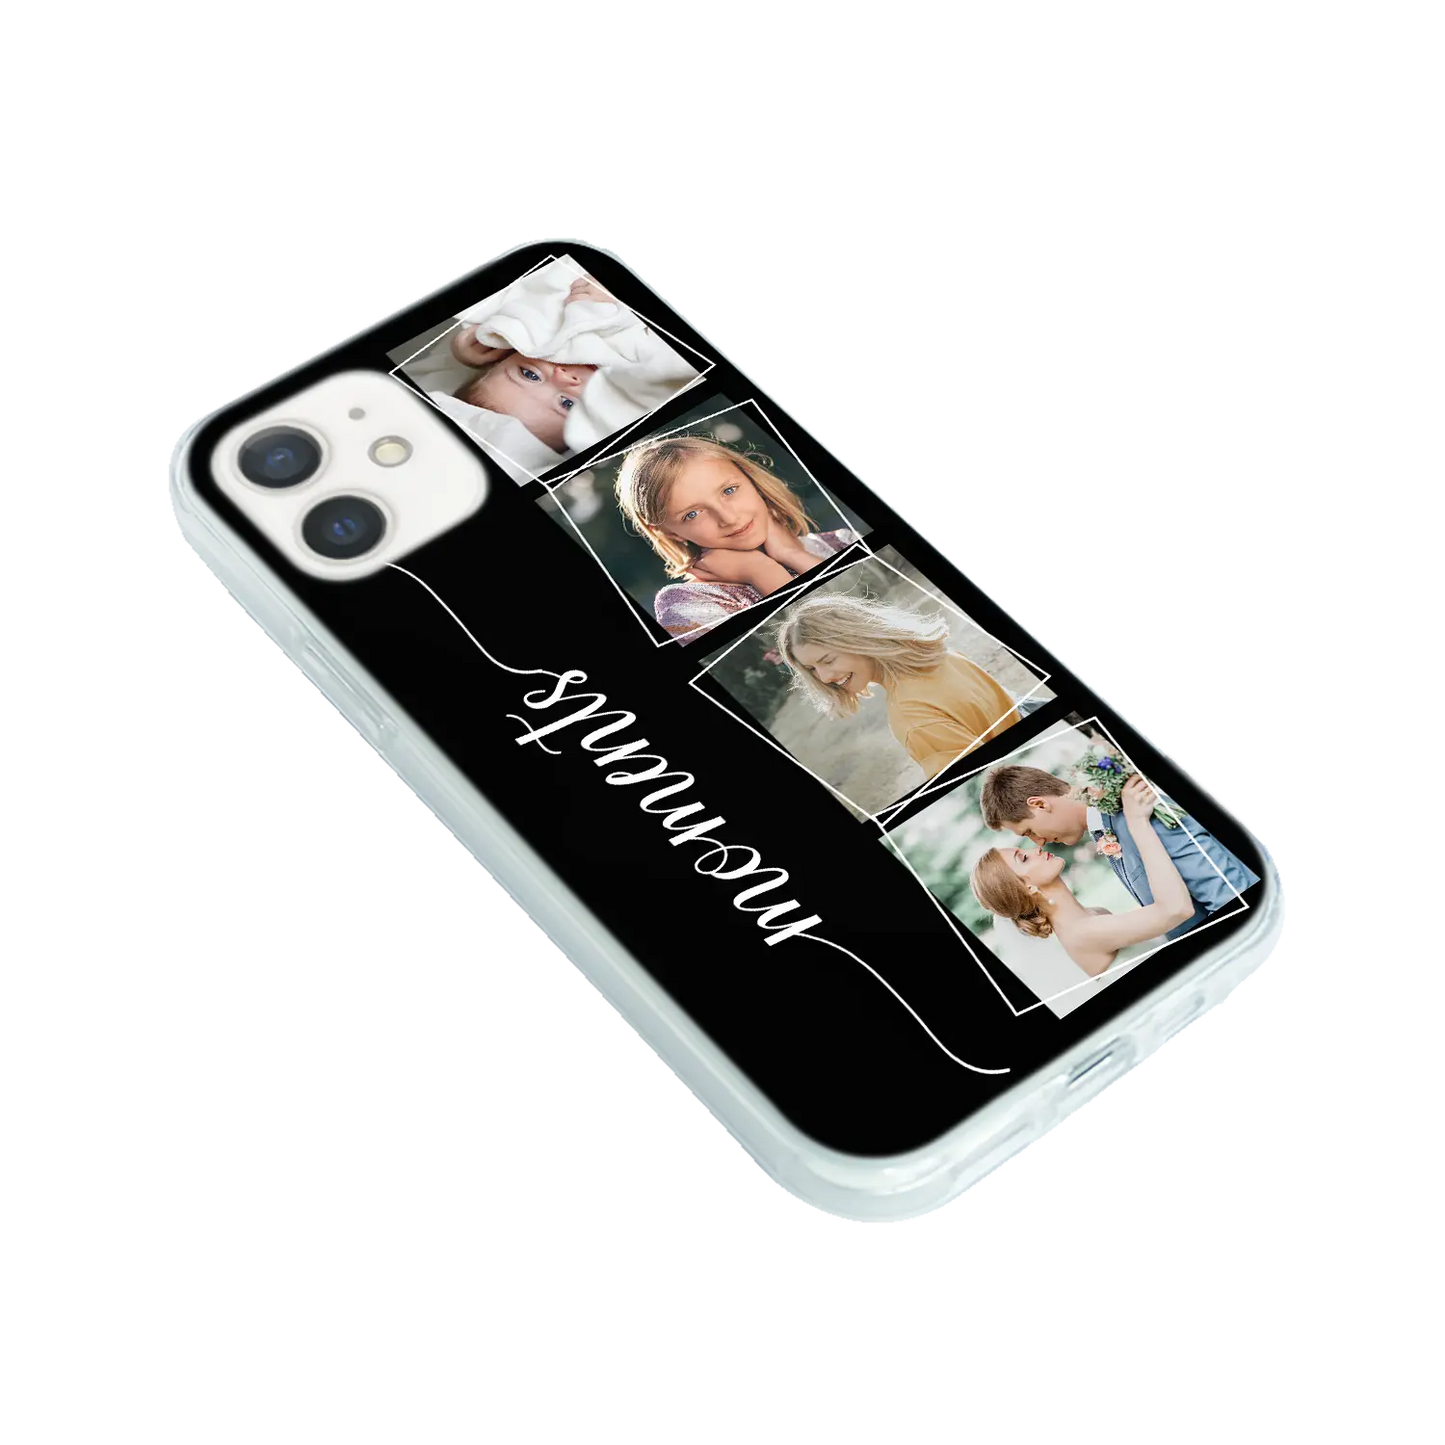 Moments - Coque Galaxy S personnalisée